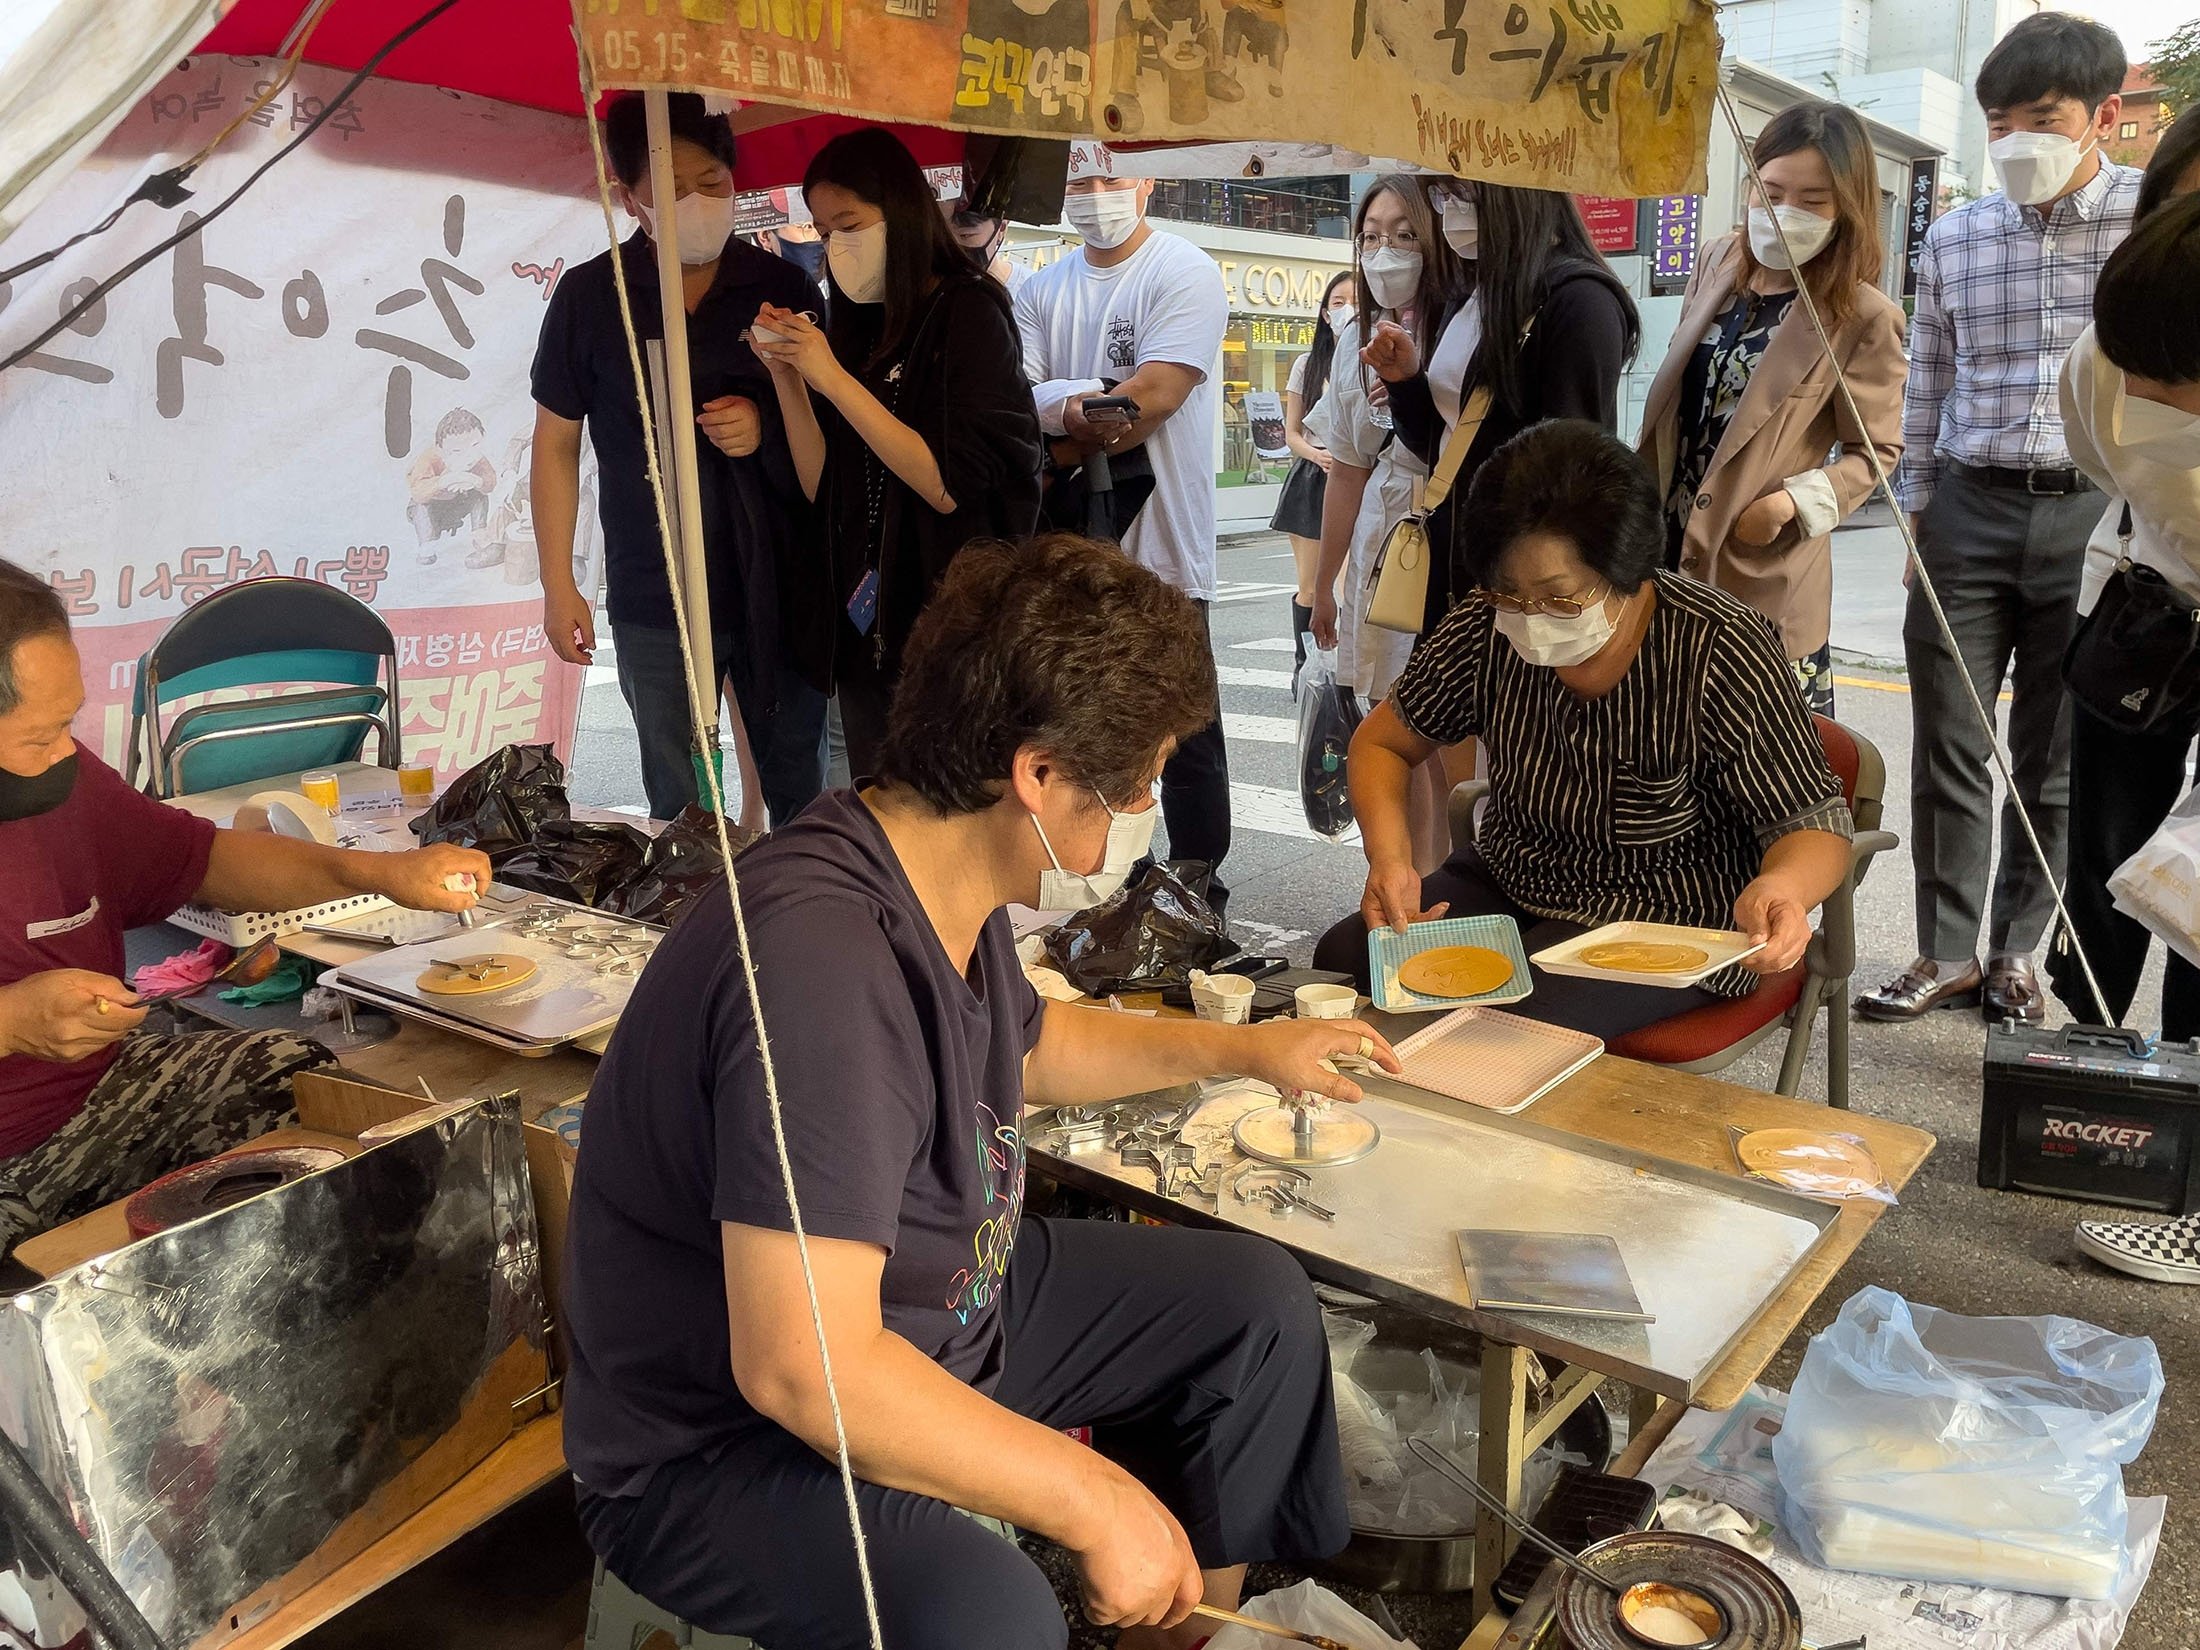 Customers wait in line as street vendor Jung Jung-soon (C) and her husband Lim Chang-joo (L) sell freshly made dalgonas, a crisp sugar candy featured in the Netflix smash hit series "Squid Game," in Seoul, South Korea, Oct. 10, 2021. (AFP Photo)